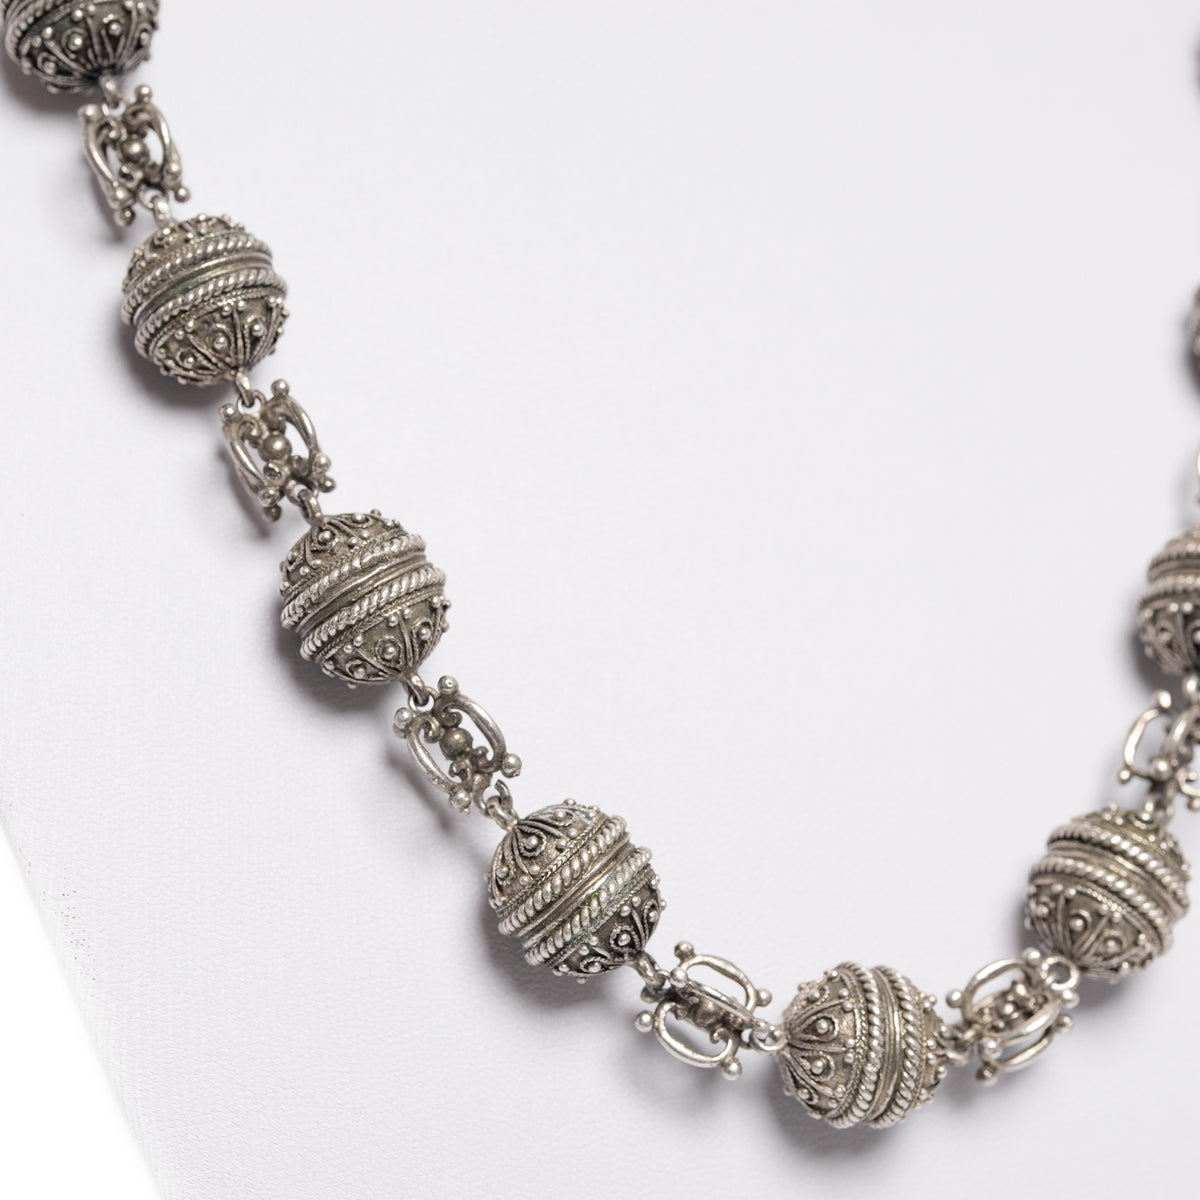 Vintage Yemenite Hand Made Ethnic Heavy Silver Beaded Necklace 54cms Length (A1268)